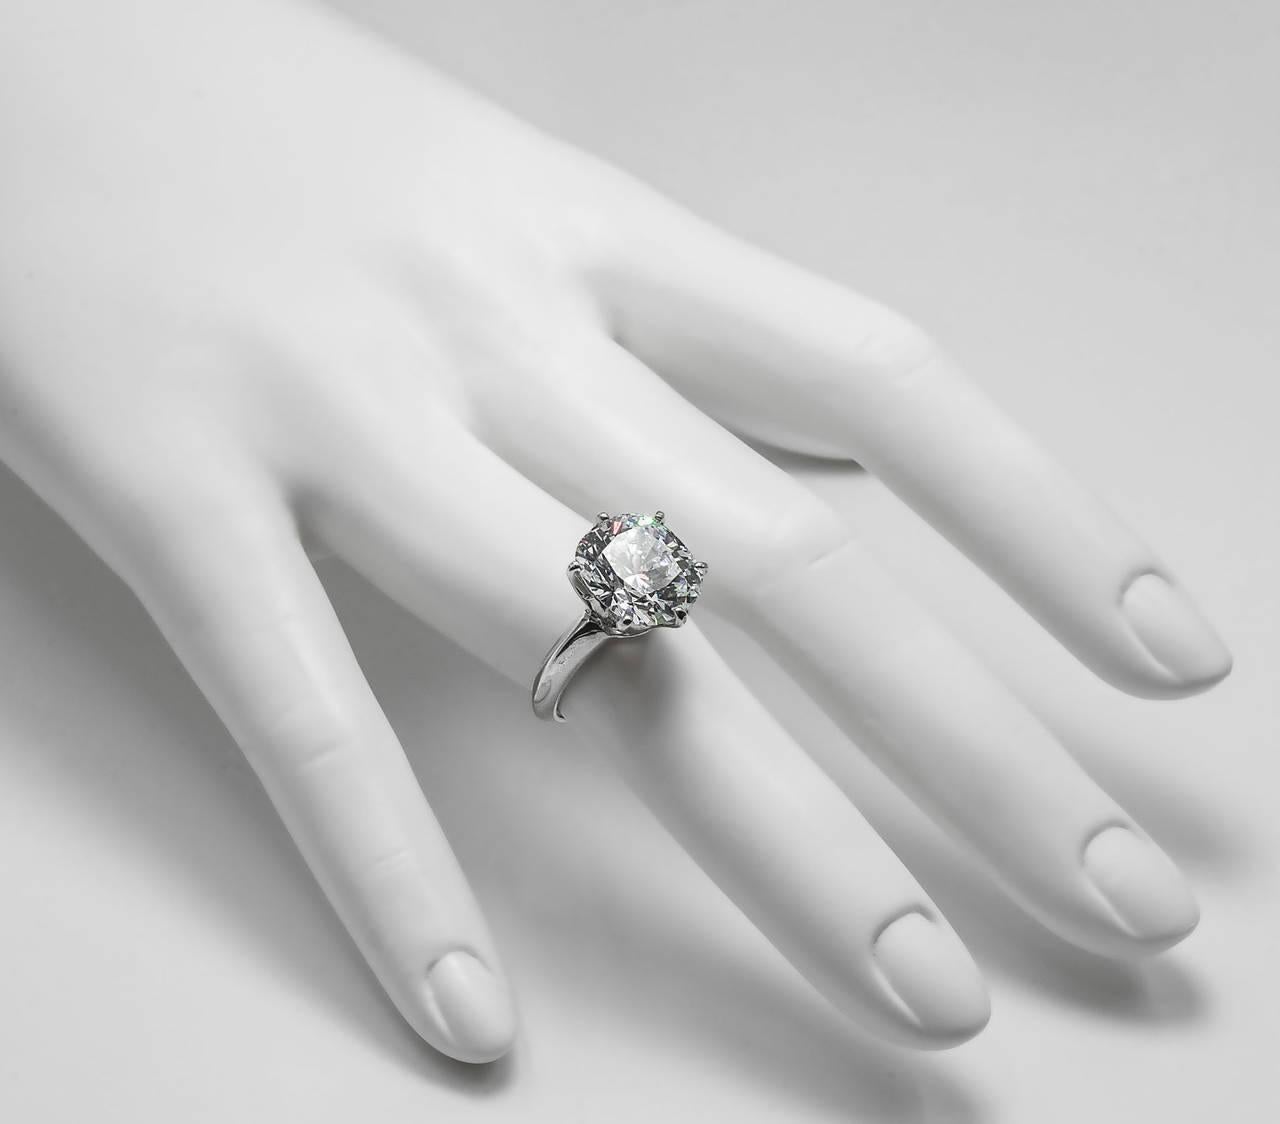 Wonderful brilliant faux antique cushion cut white 5 carat diamond weight ring made of hand cut cubic zircon set in rhodium sterling Tiffany style setting.

Can be sized free of charge to fit.